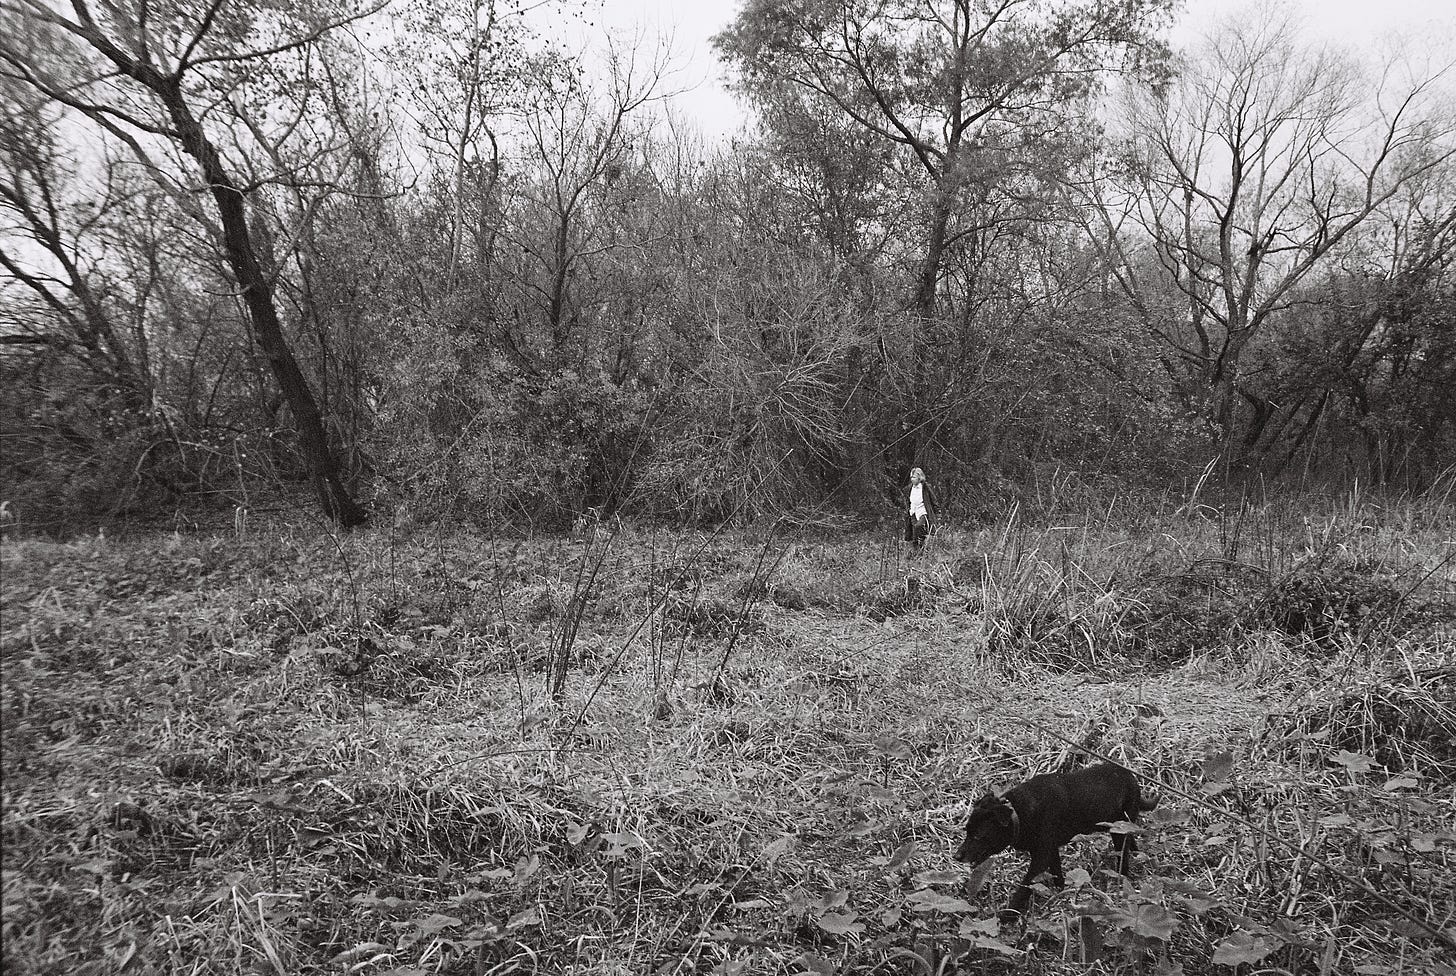 Black and white photo of an elderly woman and black hound dog walking in a wetland